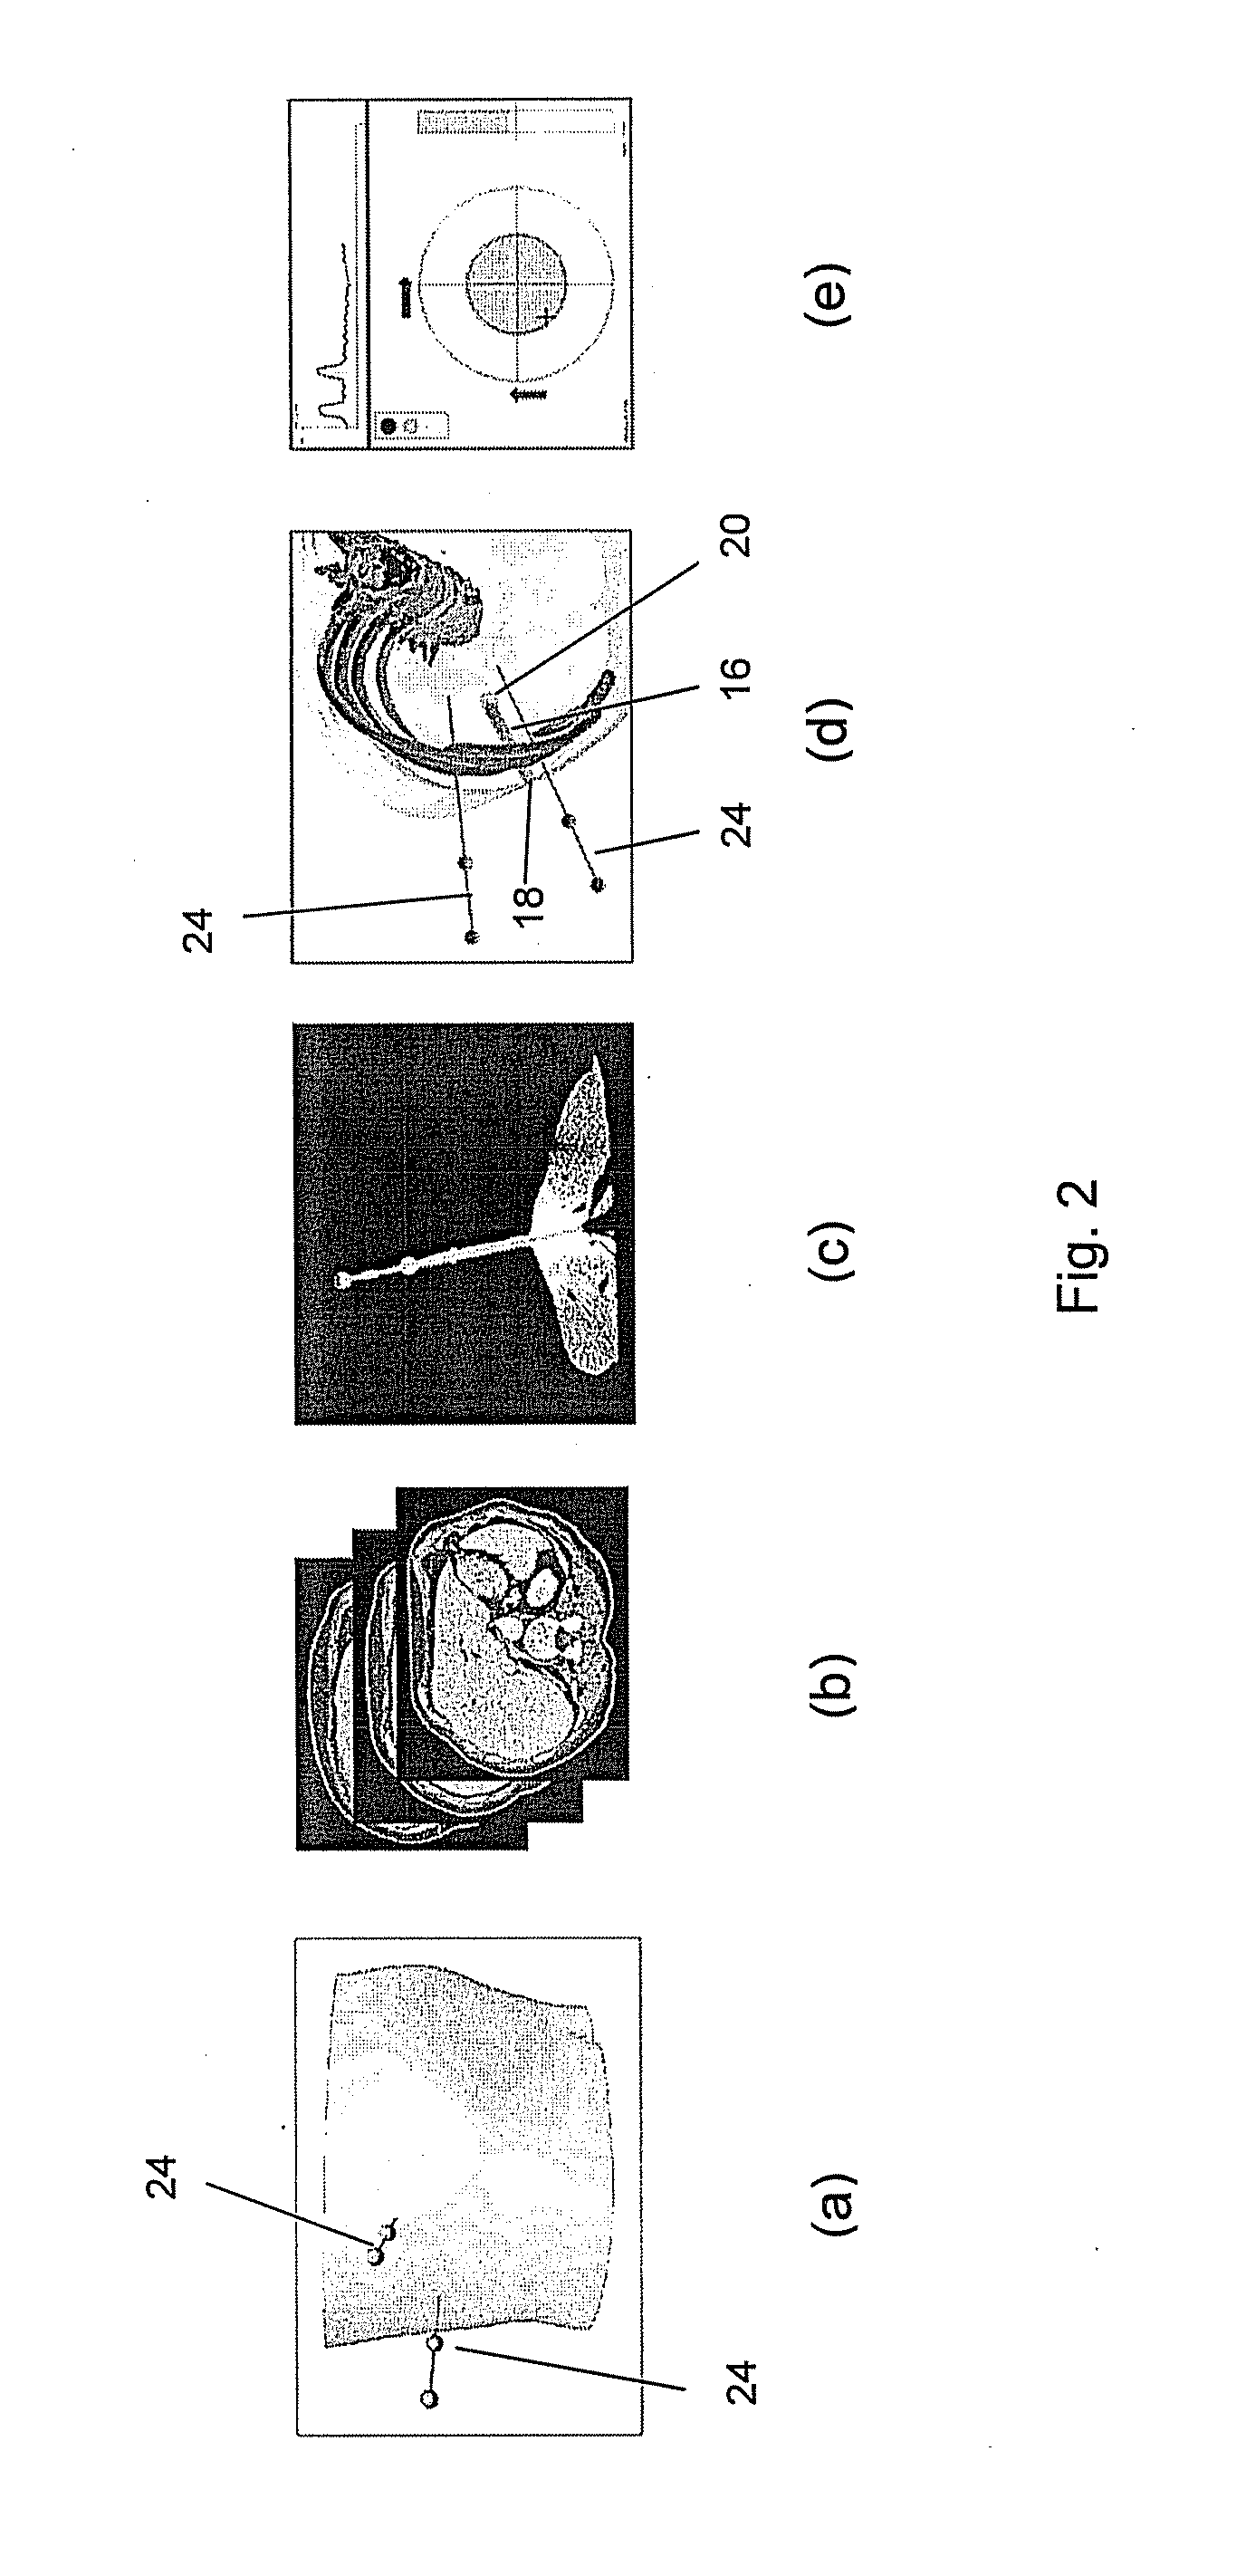 Method, system and computer program product for targeting of a target with an elongate instrument